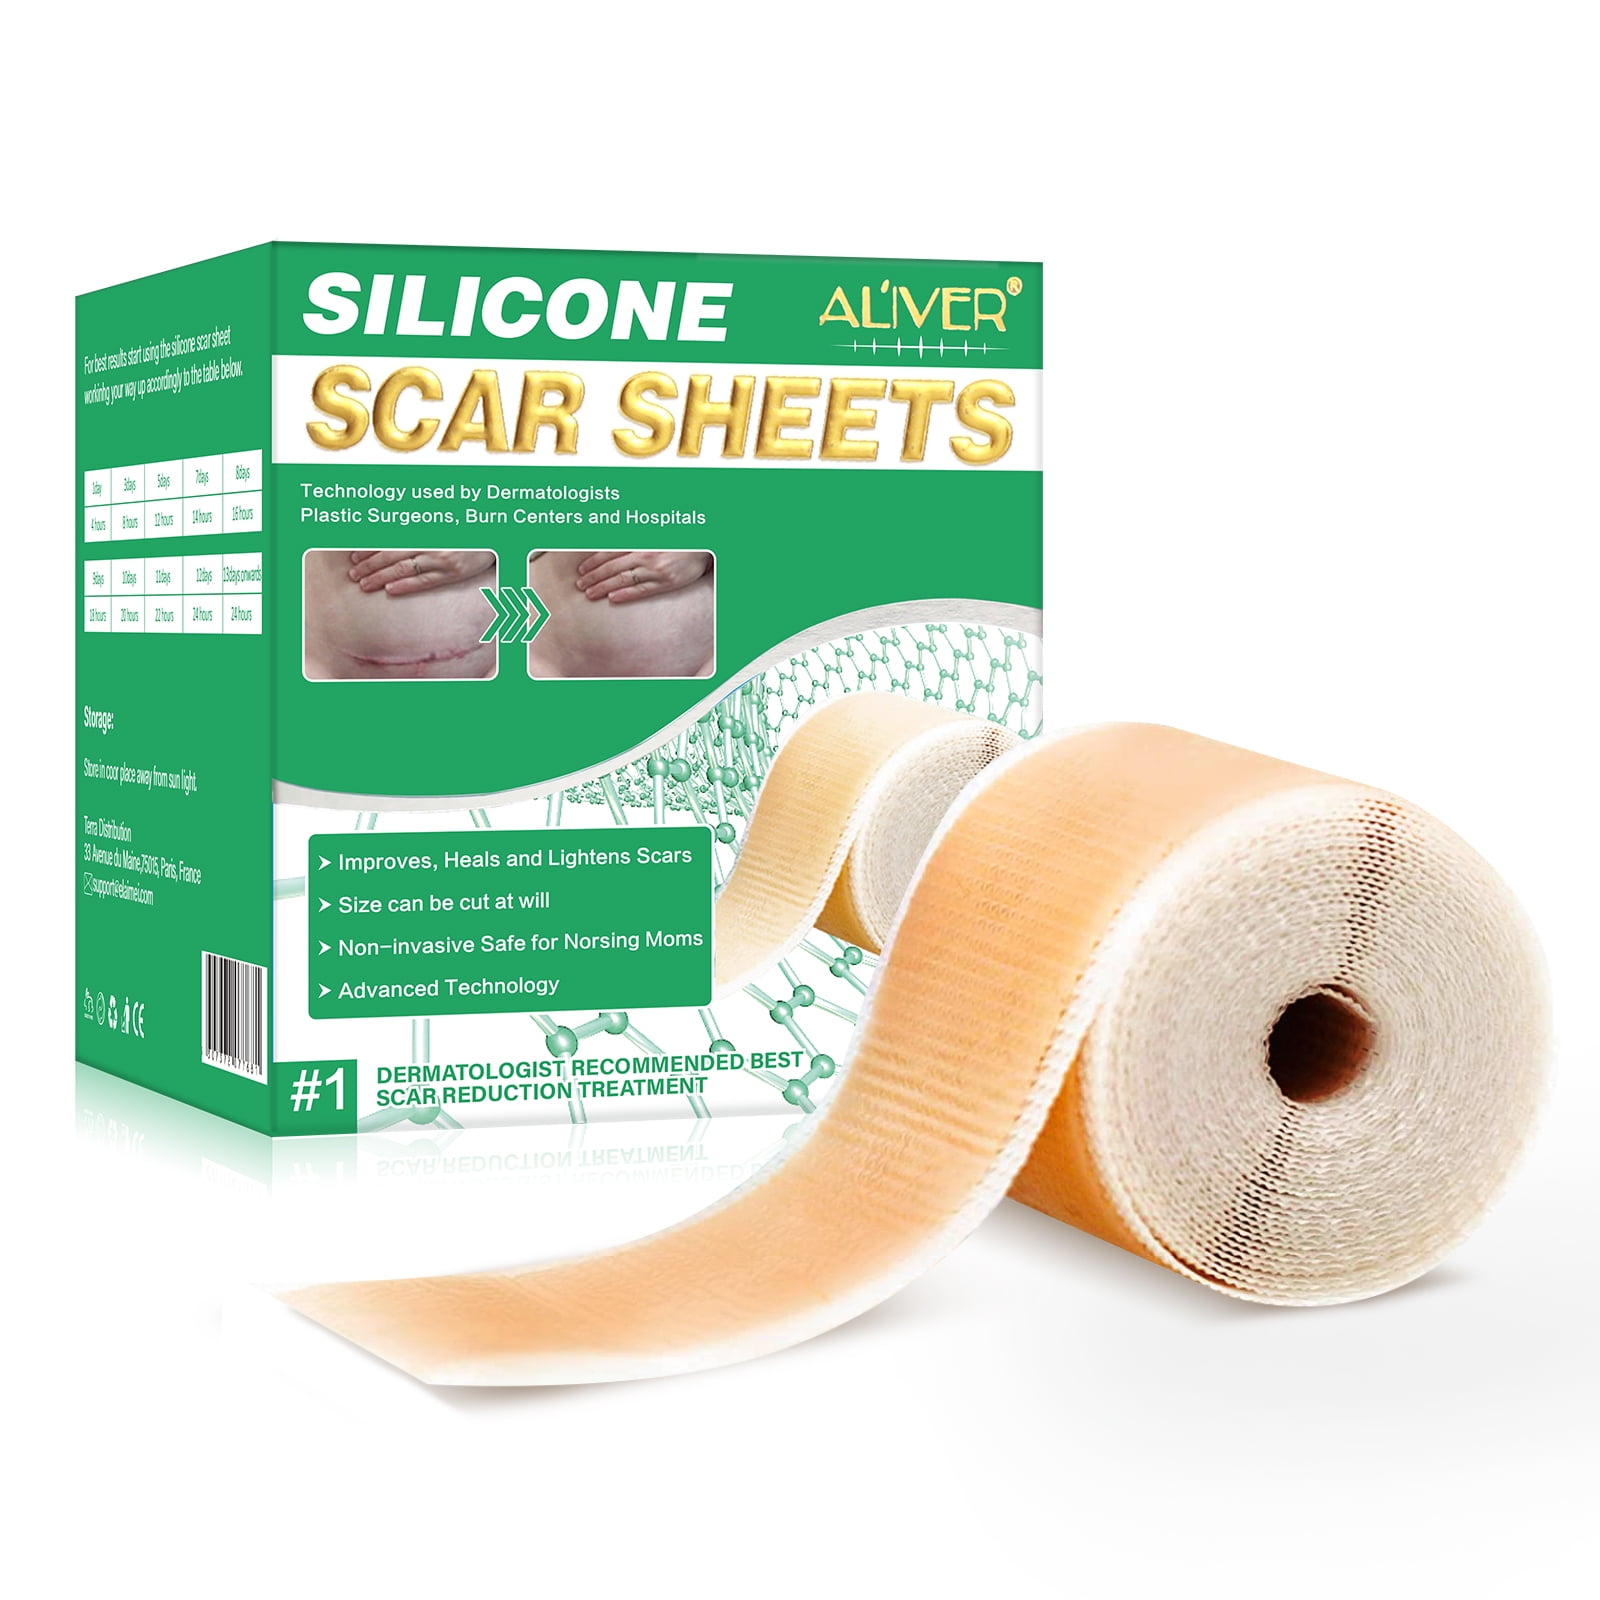 Silicone Scar Tape (1.57 * 120 Inches), Maskiss Silicone Scar